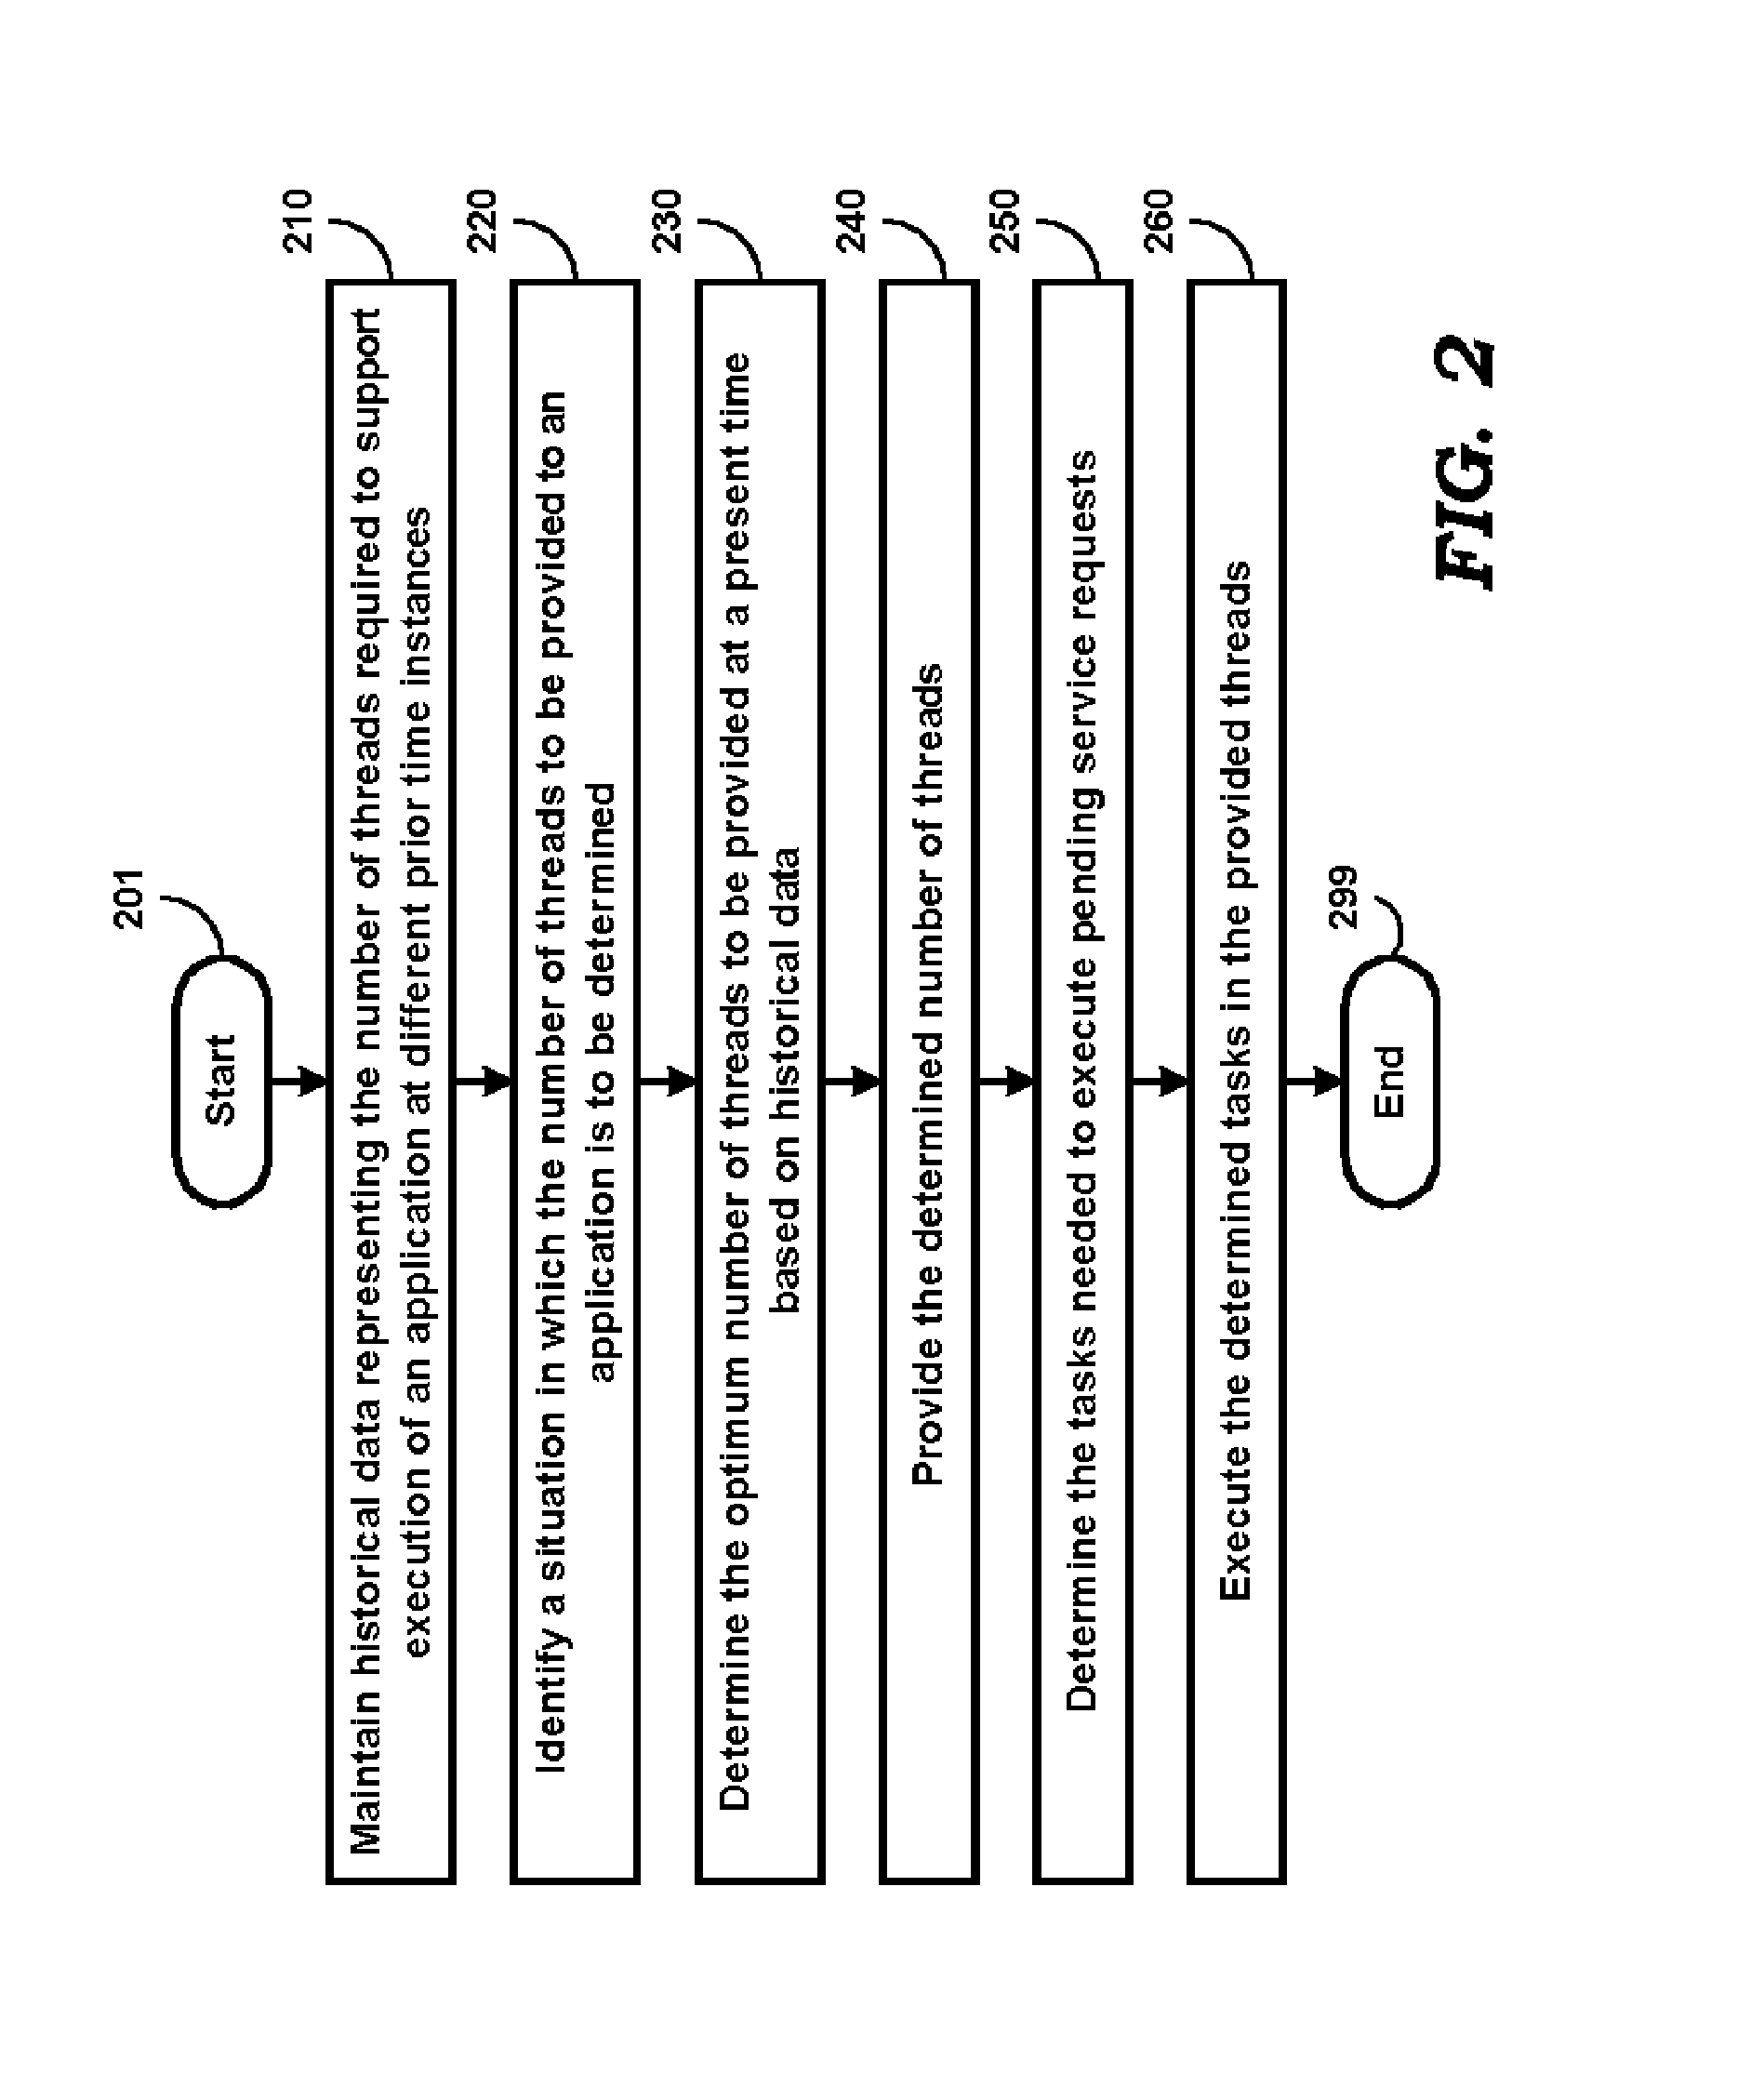 Providing Optimal Number of Threads to Applications Performing Multi-tasking Using Threads